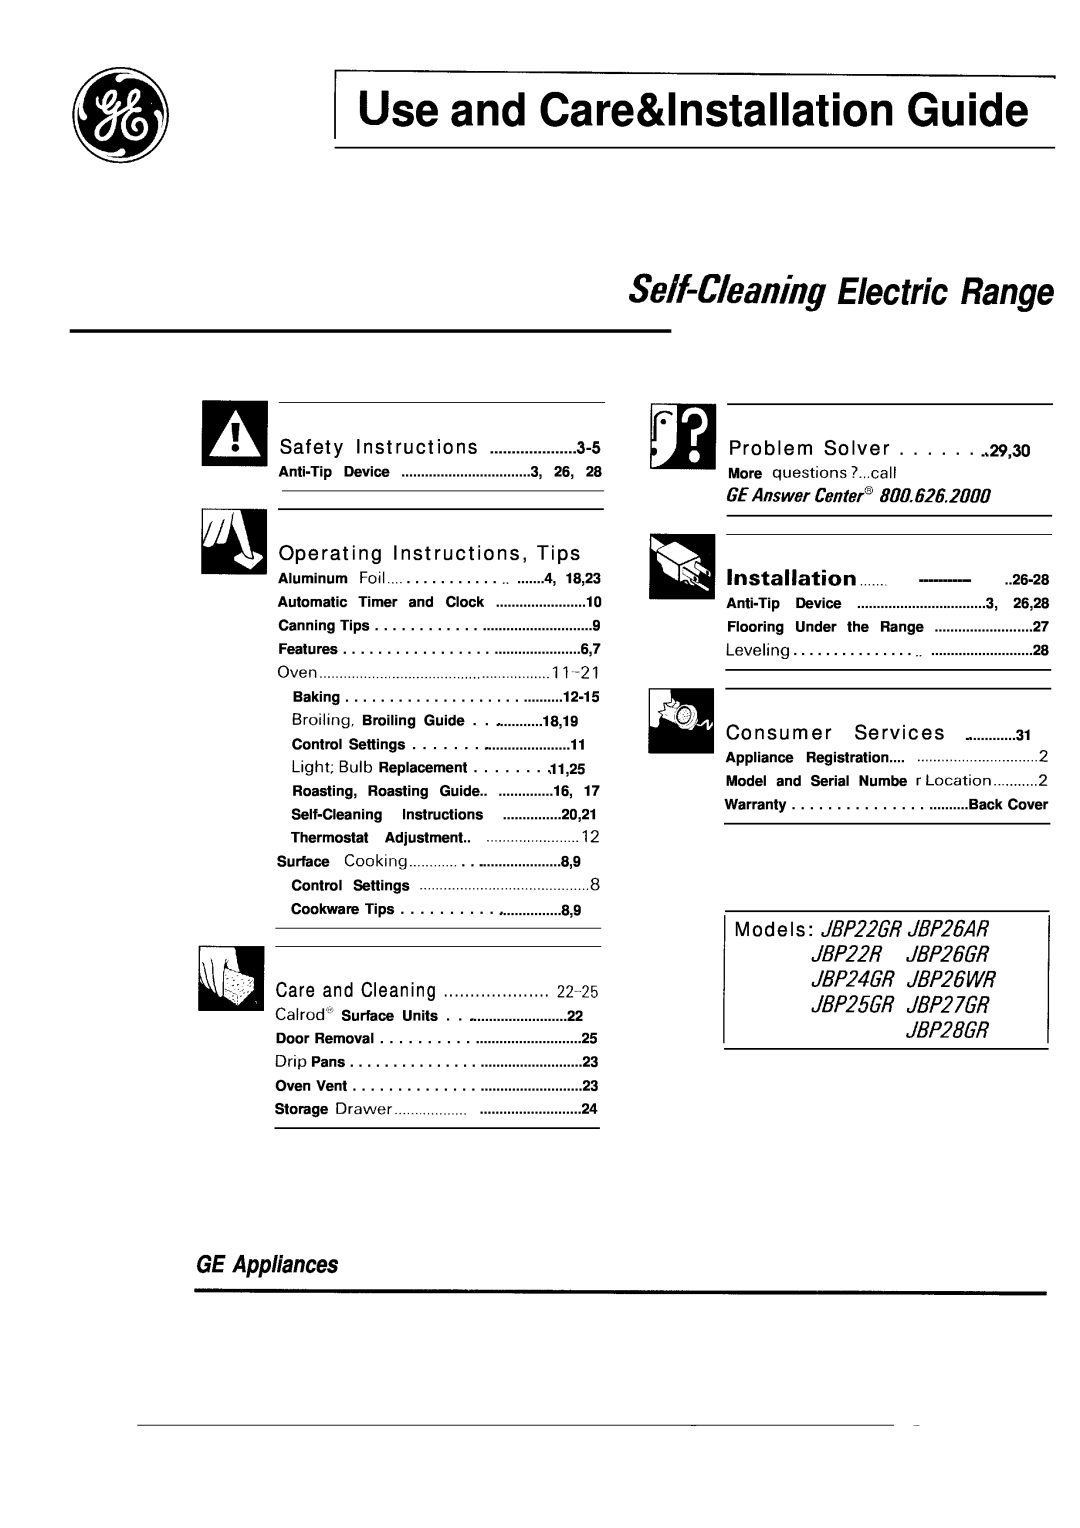 GE JBP25GR warranty p se and Care&Installation Guide, SelfiCleaning Electric Range, GE Appliances, Safety Instructions 